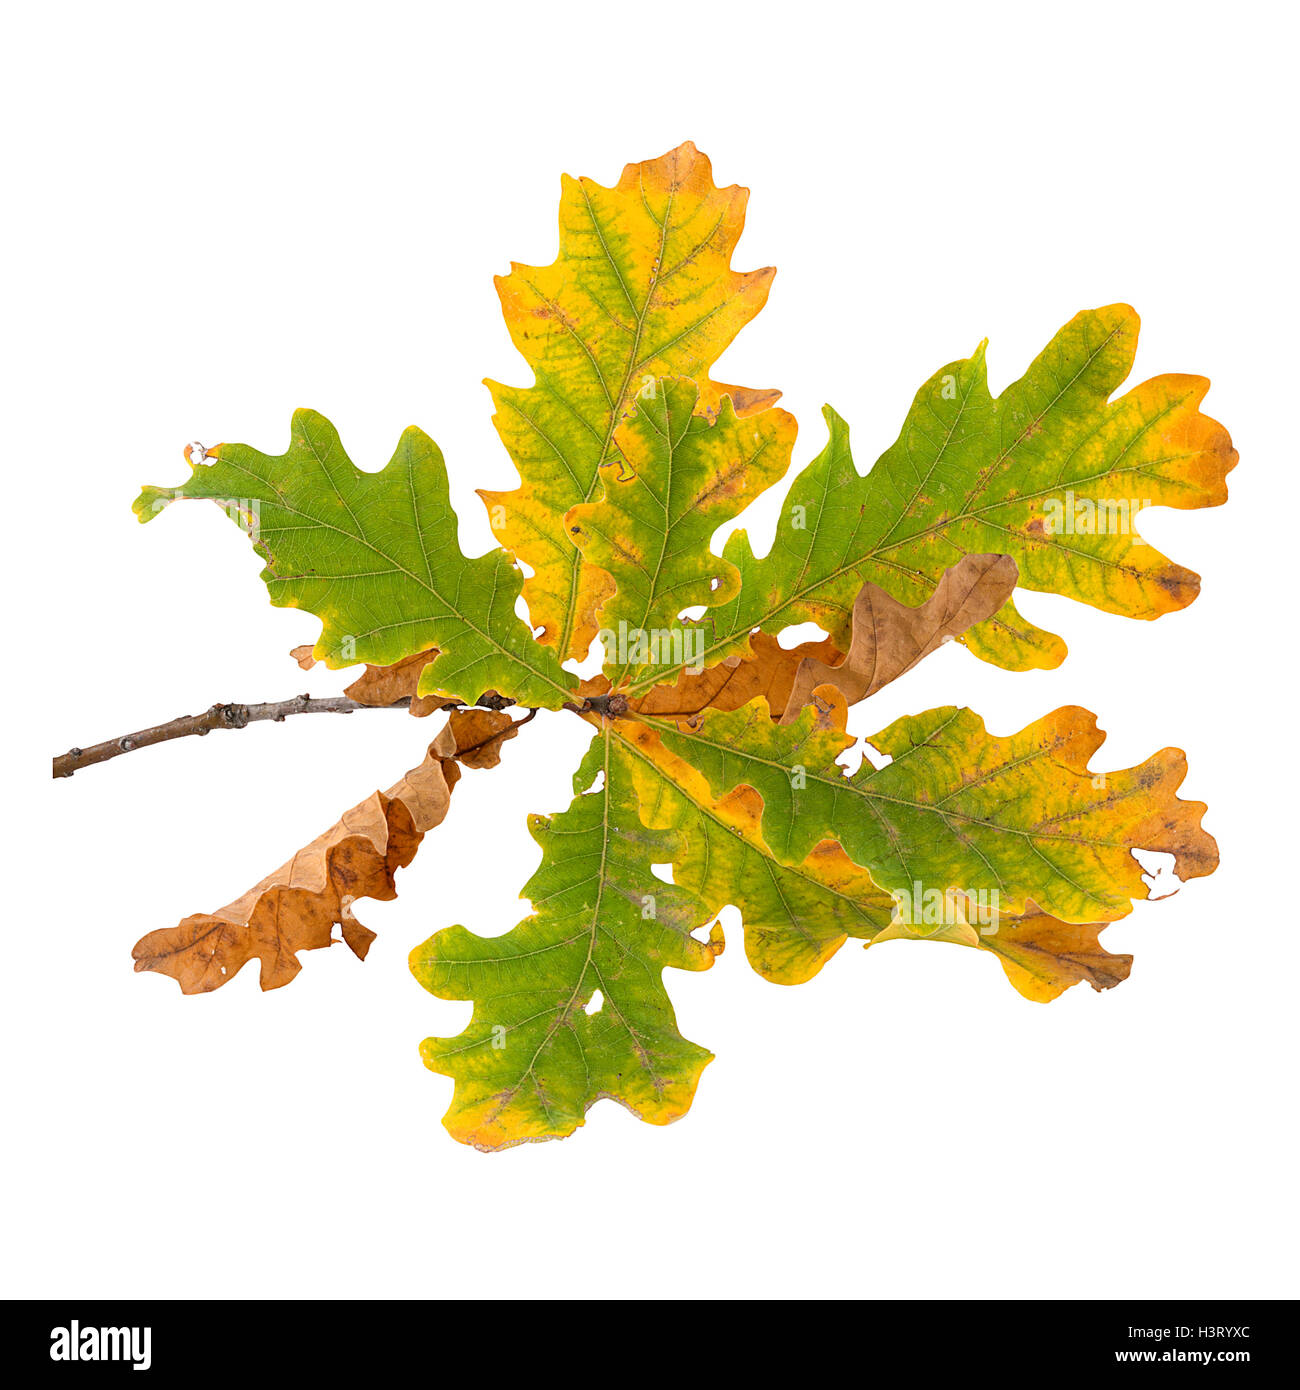 Autumn oak tree branch with yellow and green leaves isolated Stock Photo